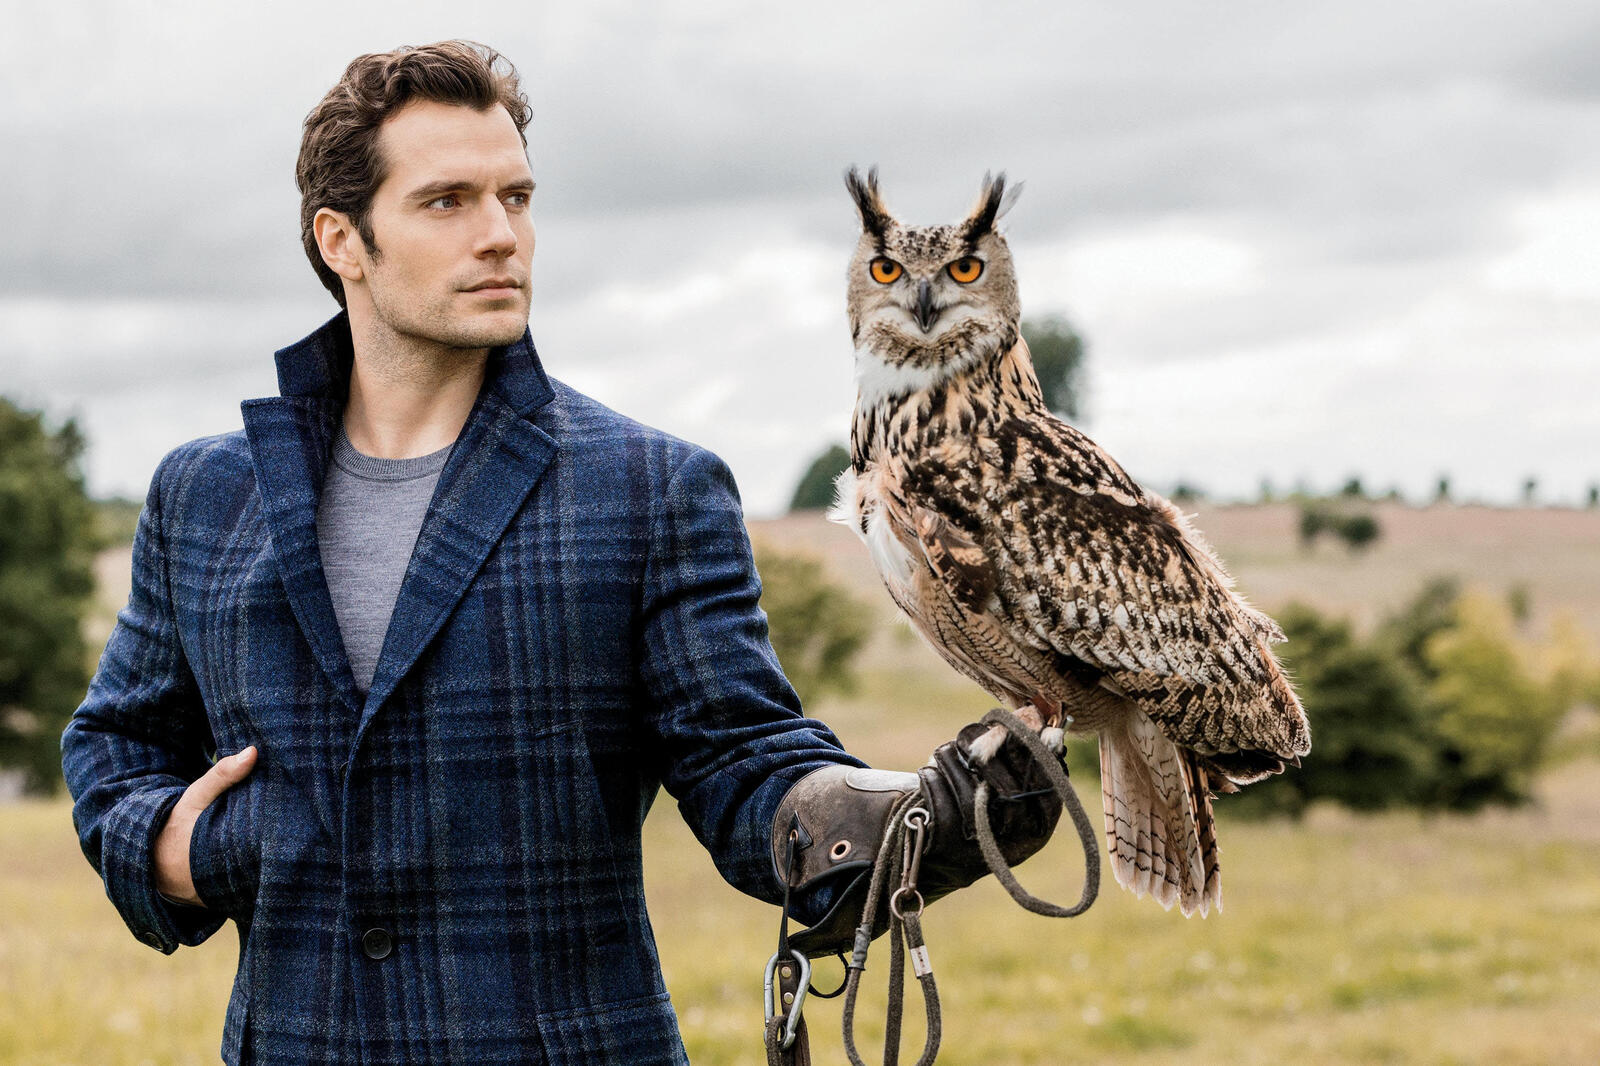 Free photo Henry Cavill with an owl on his arm.